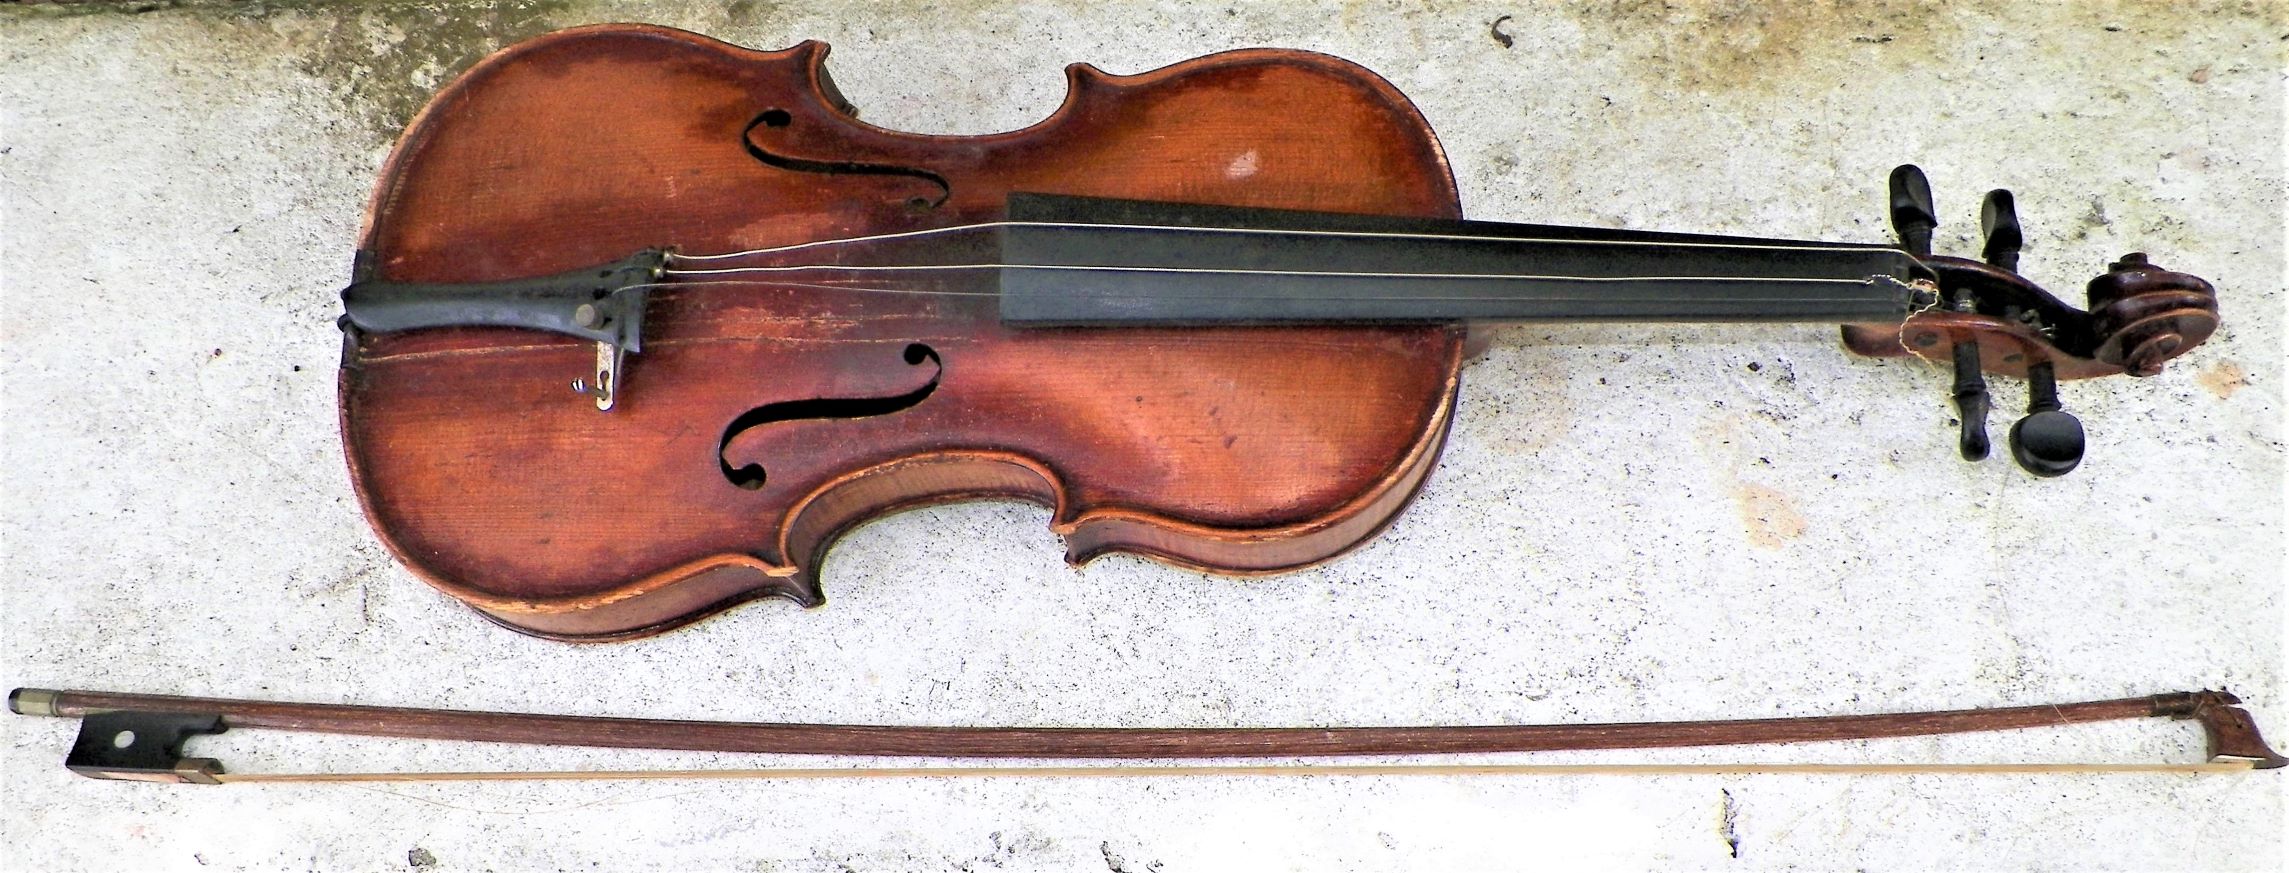 MUSIC VIOLIN WITH CASE 2AA.JPG